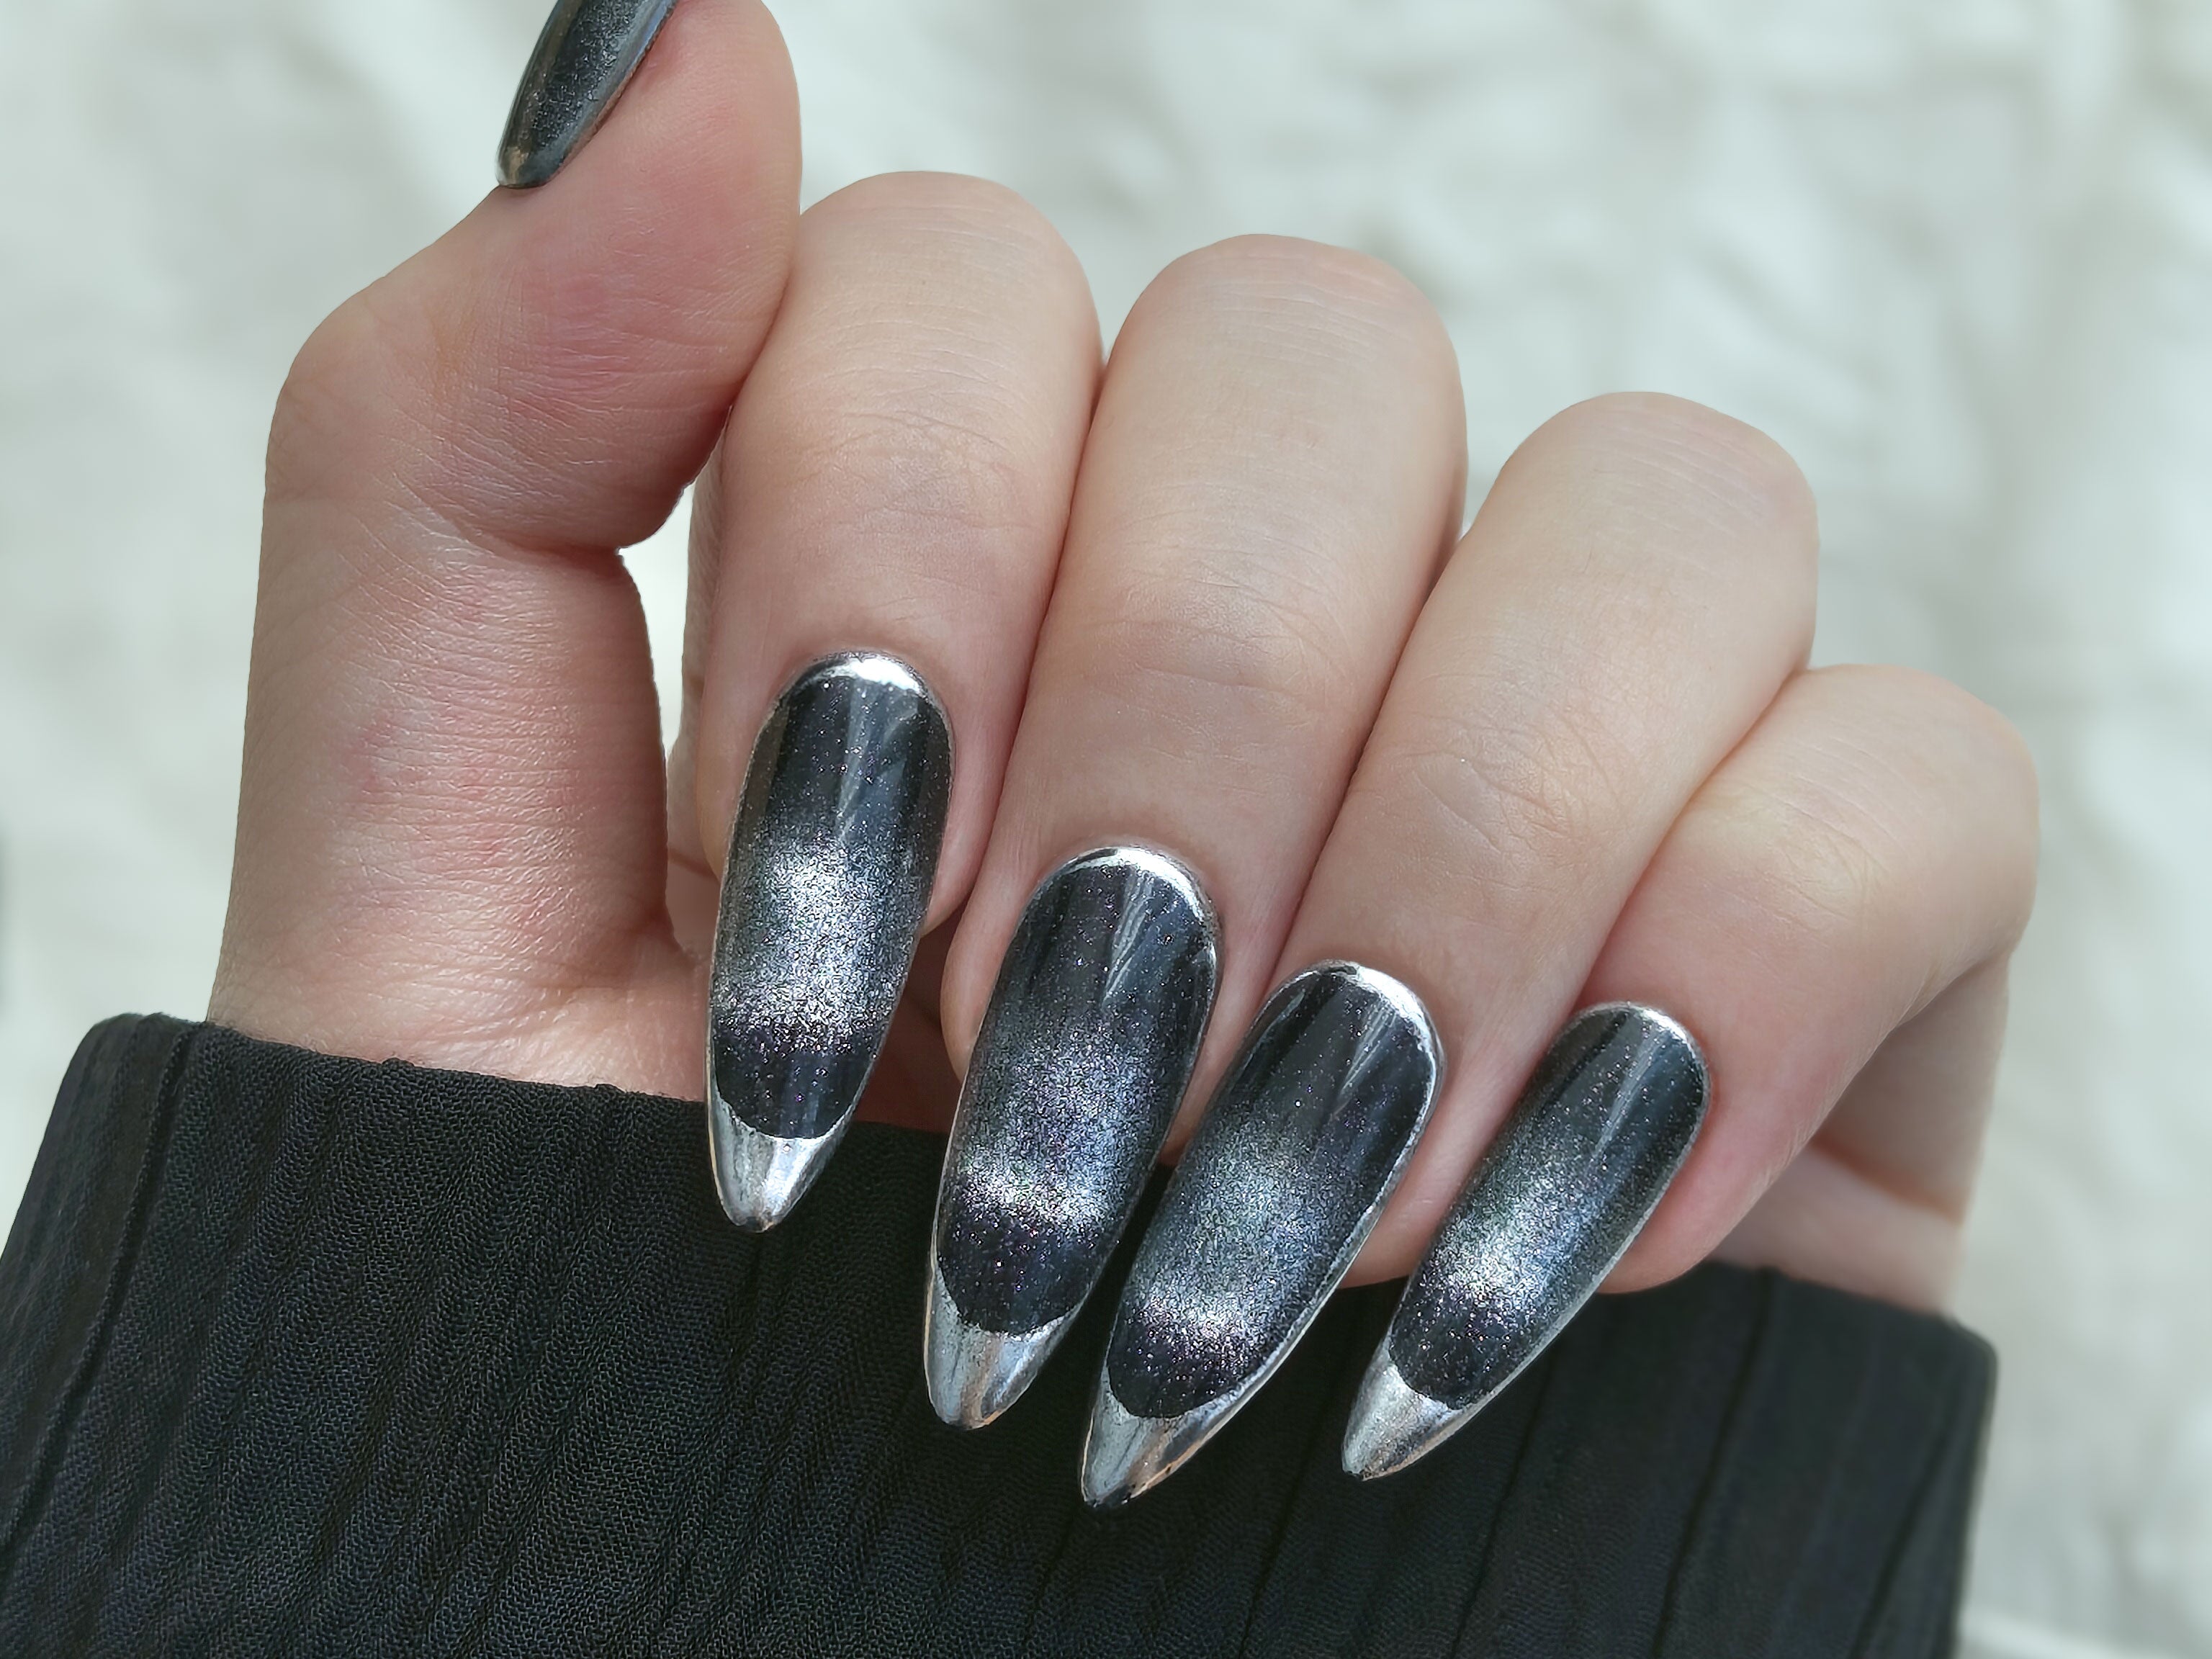 Handmade long almond French Tip Press on Nails in a velvety black base and glimmering silver